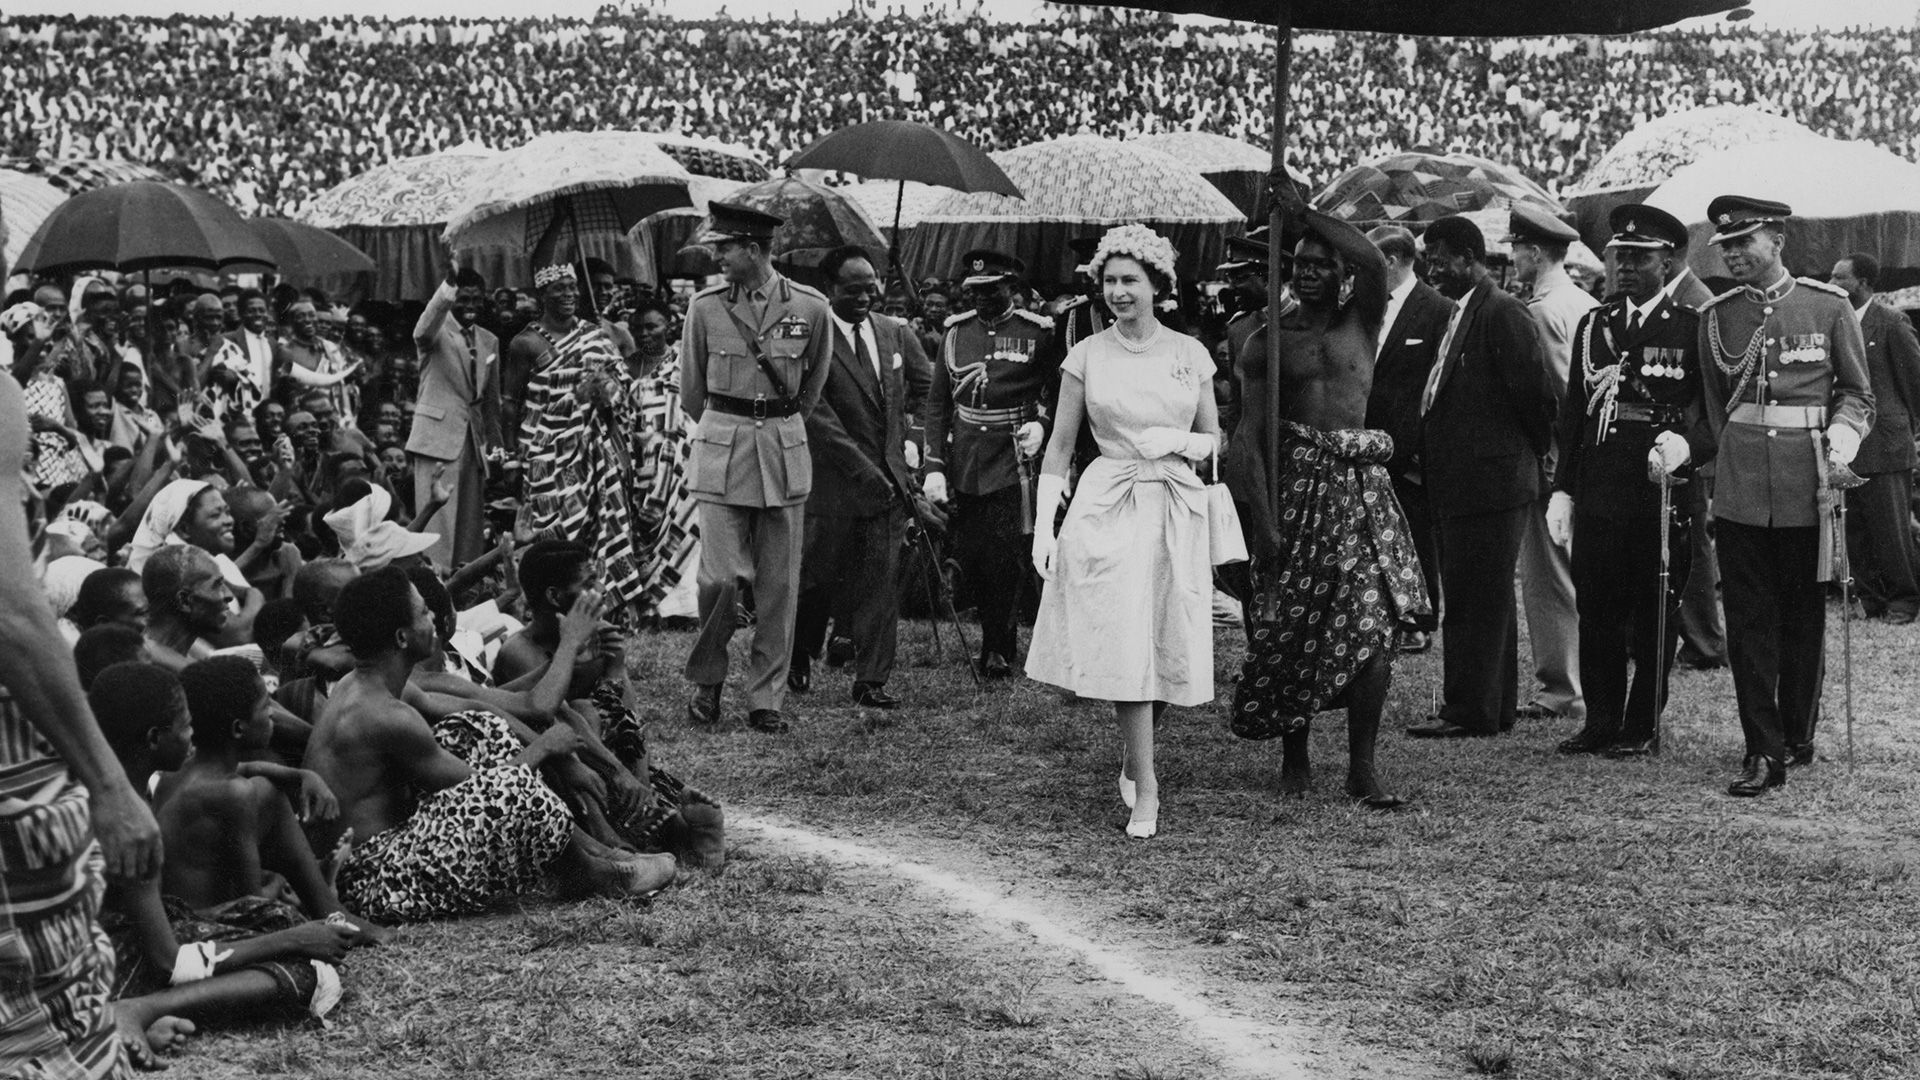 Queen dancing in Ghana: The story behind her iconic visit to save